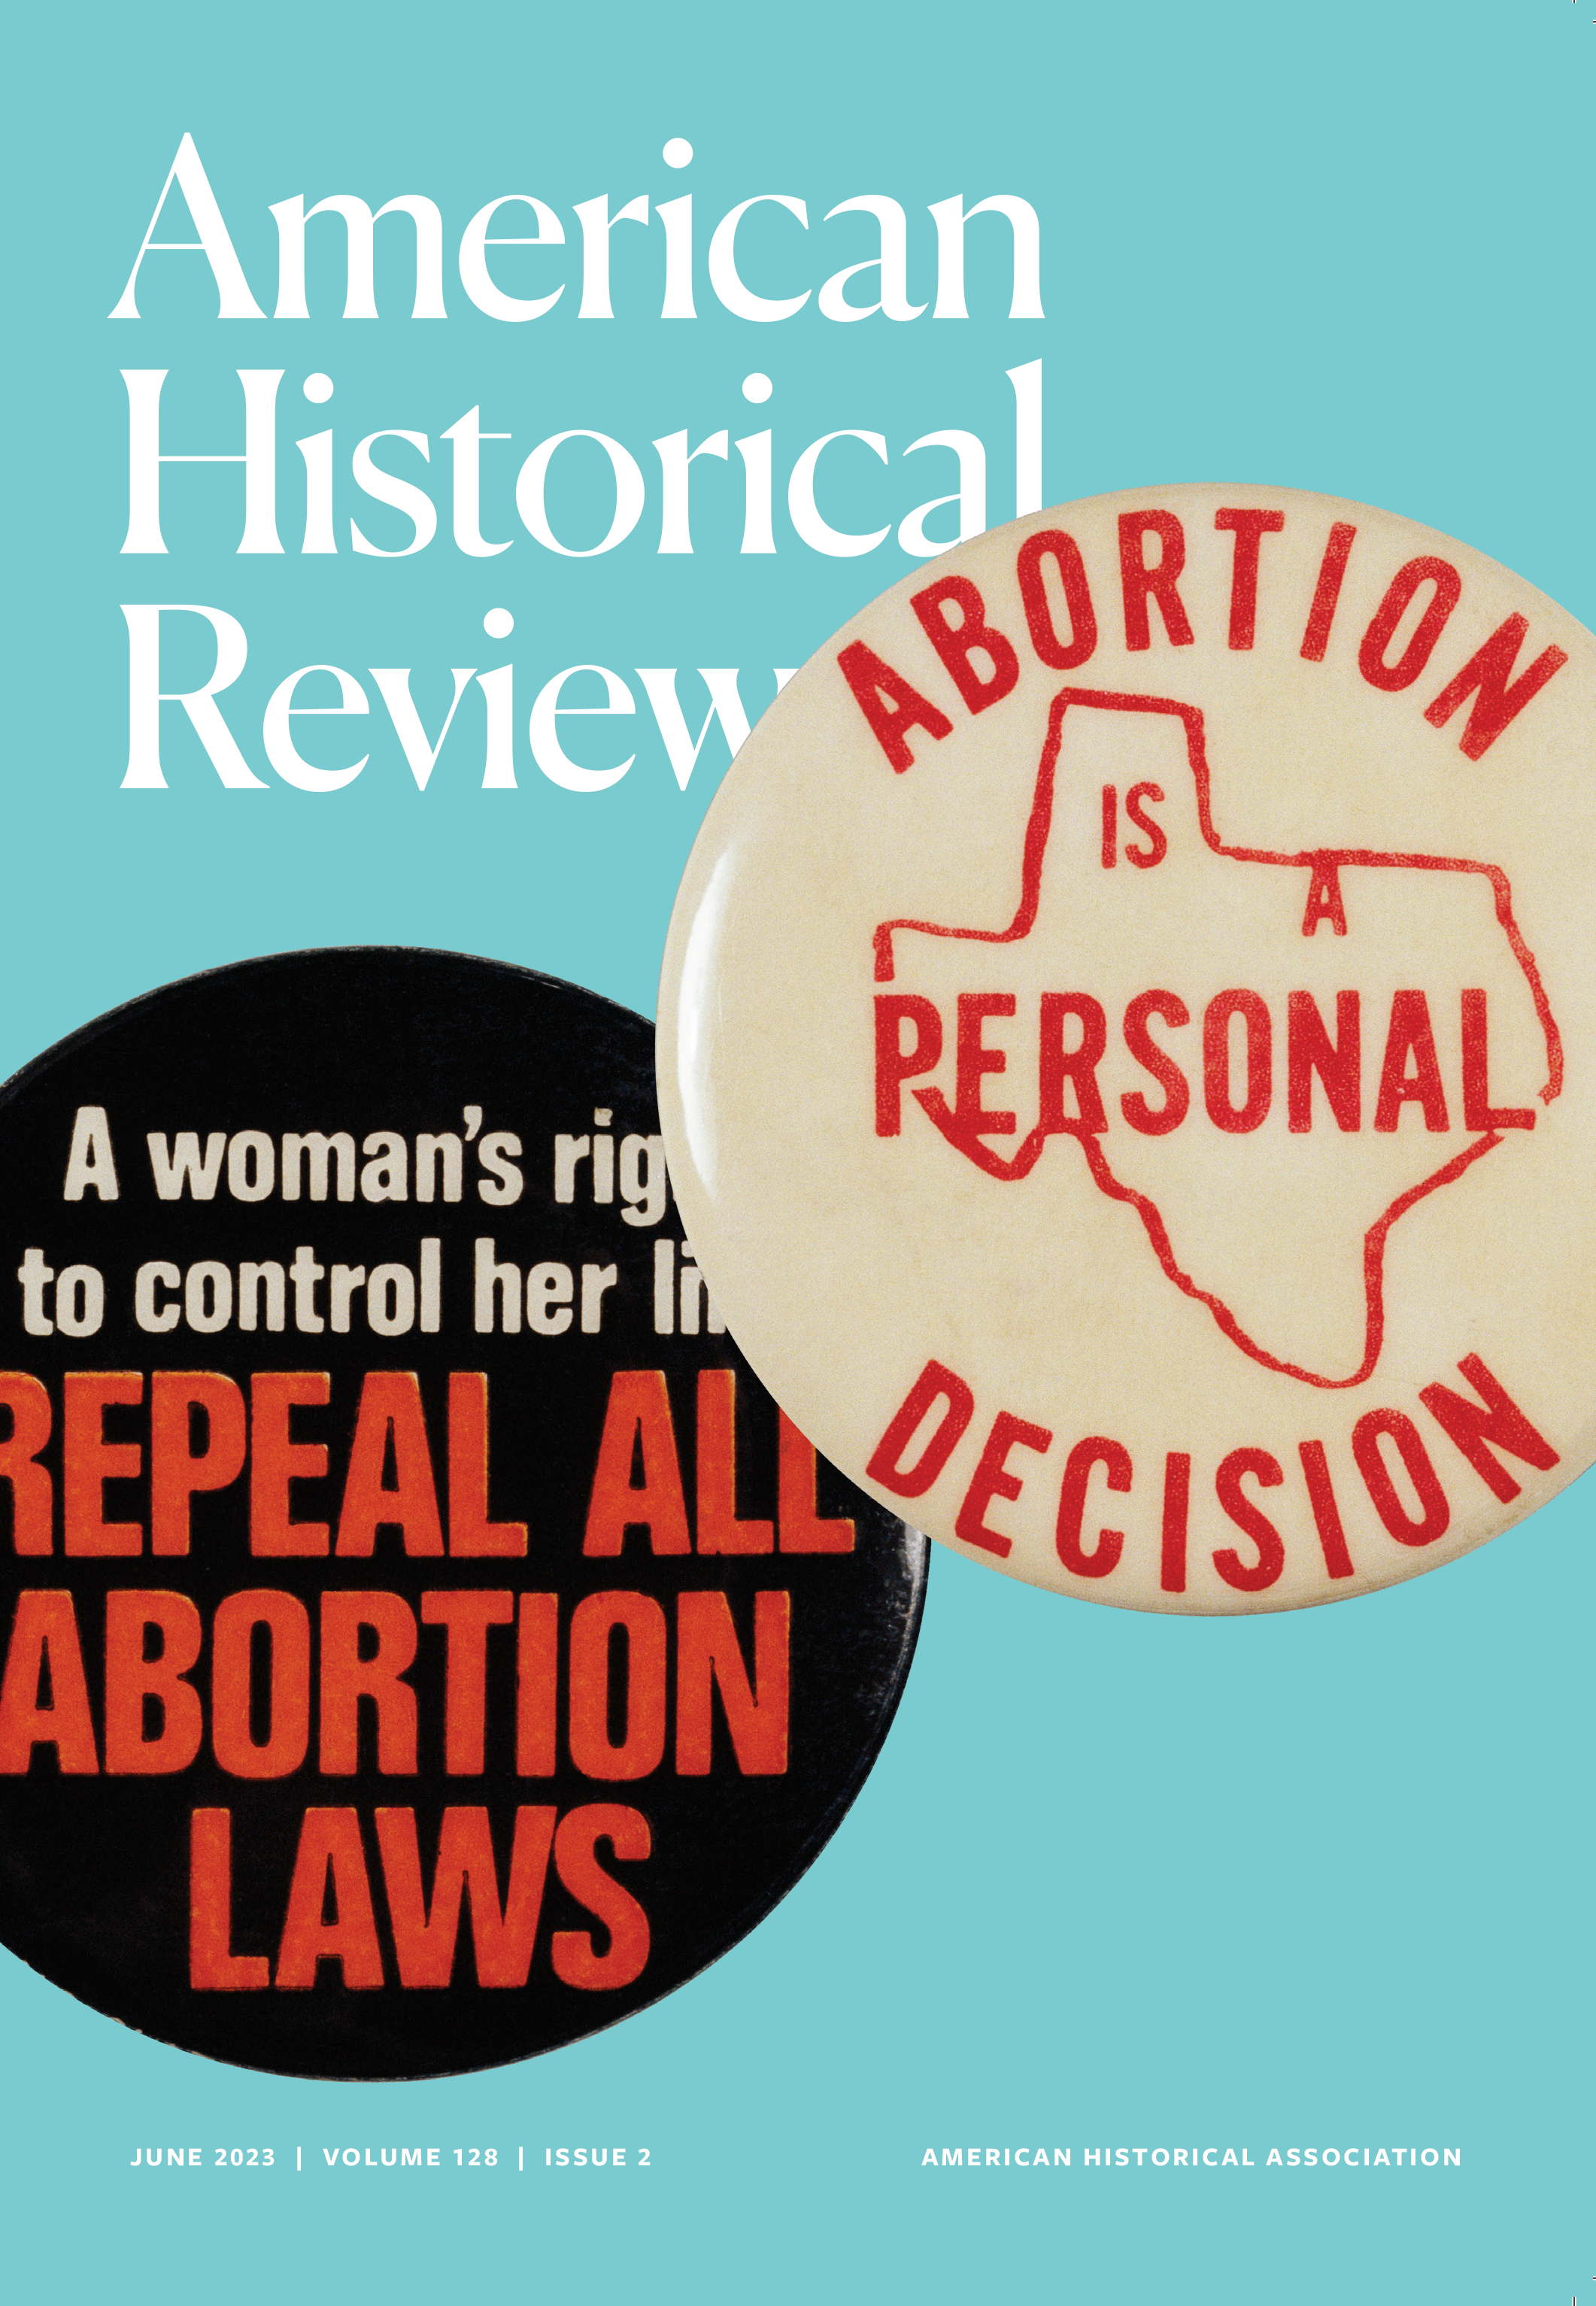 June 2023 cover of the American Historical Review featuring two buttons against a teal background. One button is black, and in white text says "A woman's right to control her life" and in all caps red text says "Repeal all abortion laws." The other button is light brown with a red outline of the state of Texas and says in red text "Abortion is a personal decision."